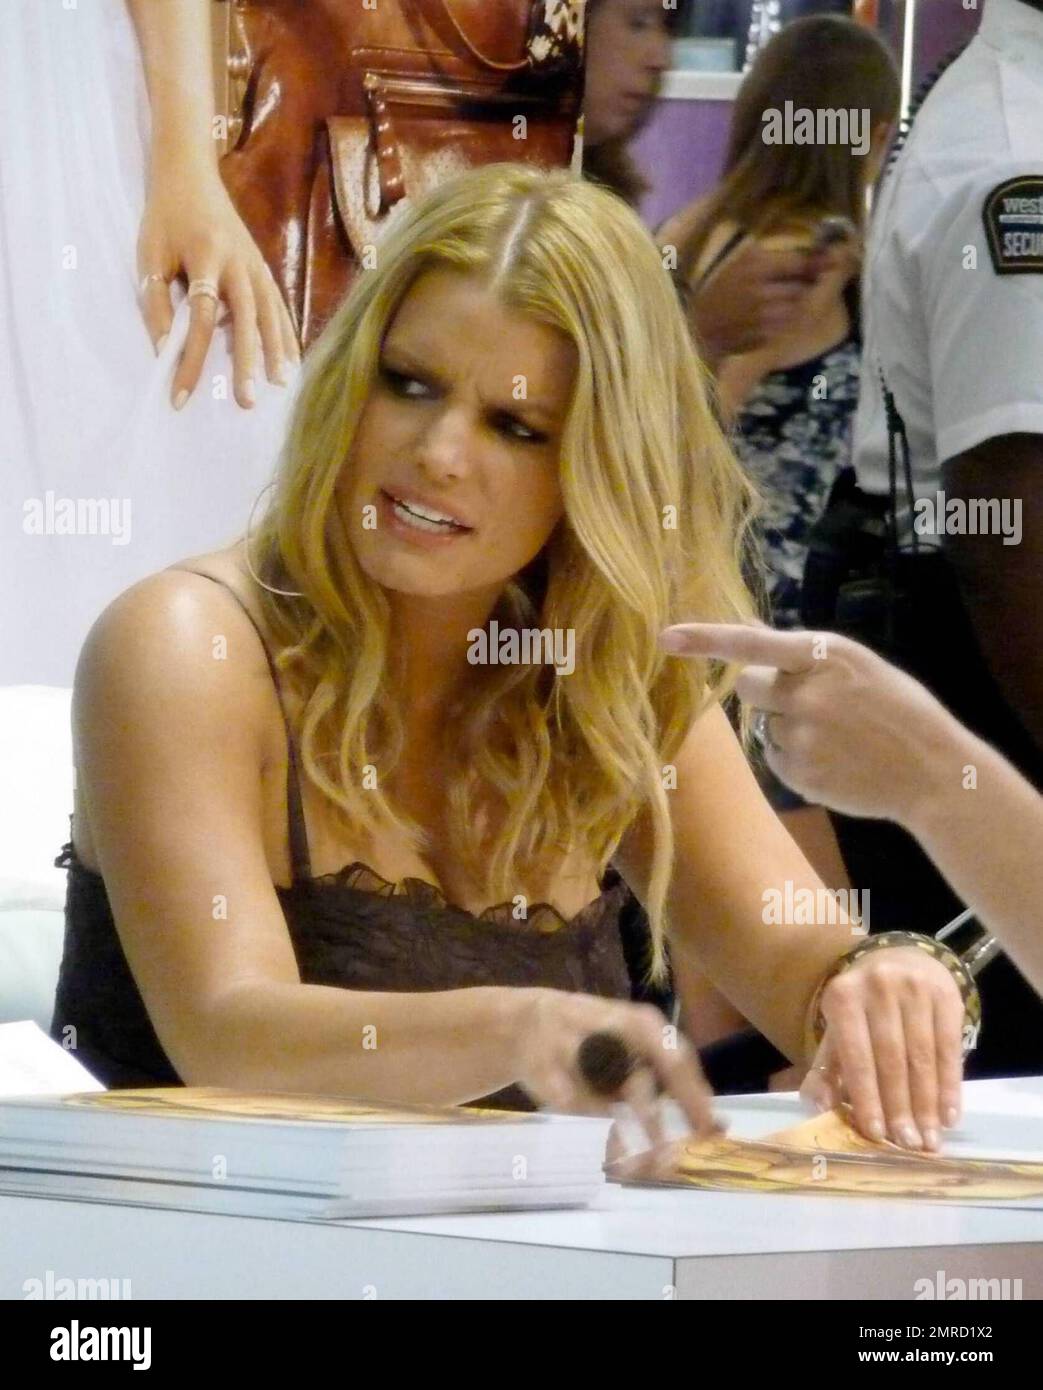 Singer and entrepreneur Jessica Simpson signs autographs for fans at a  Dilliards department store. During the session, Jessica looked beautiful in  a black dress and spent some time with a dog who